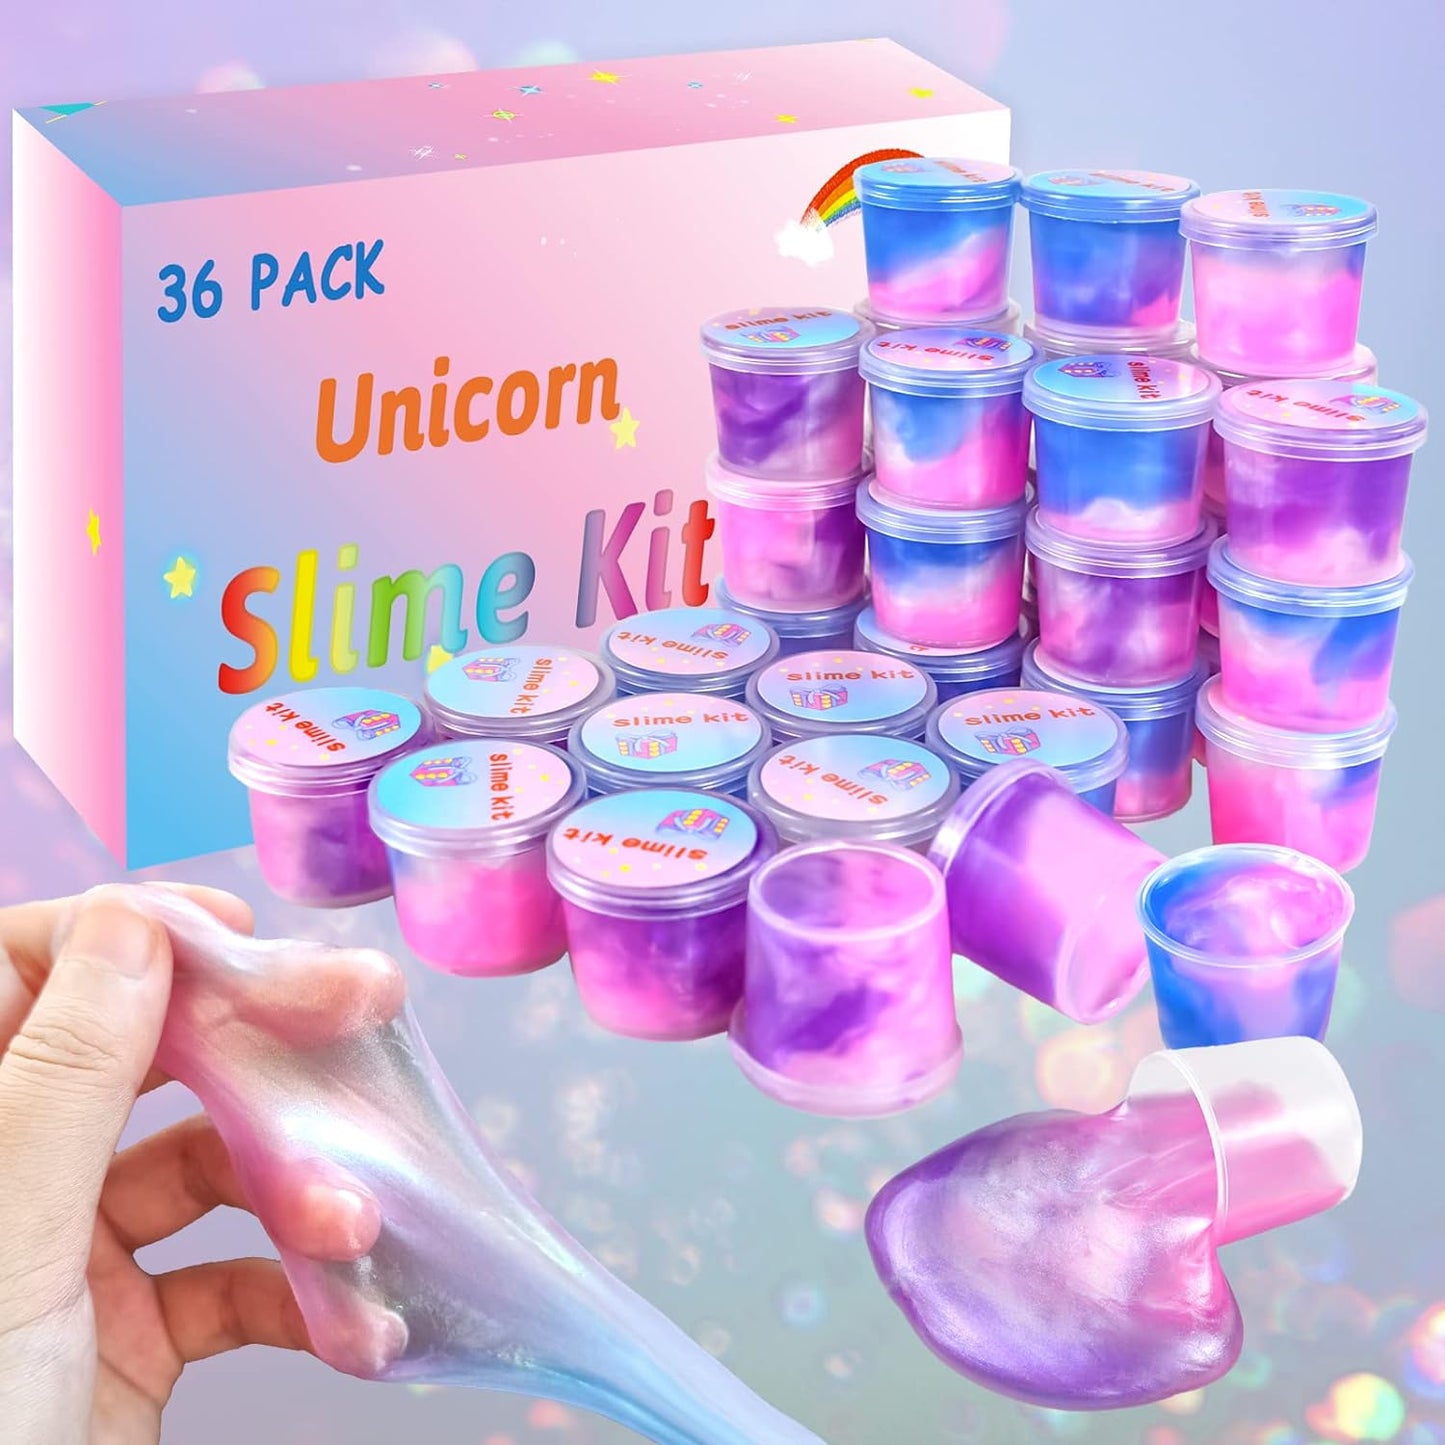 36 Packs Unicorn Slime Kit, Unicorn Party Favors for Kids, Pretty Stretchy & Non-Sticky Galaxy Slime Pack, Slime Party Favors for Girls & Boys Goodie Bag Stuffers